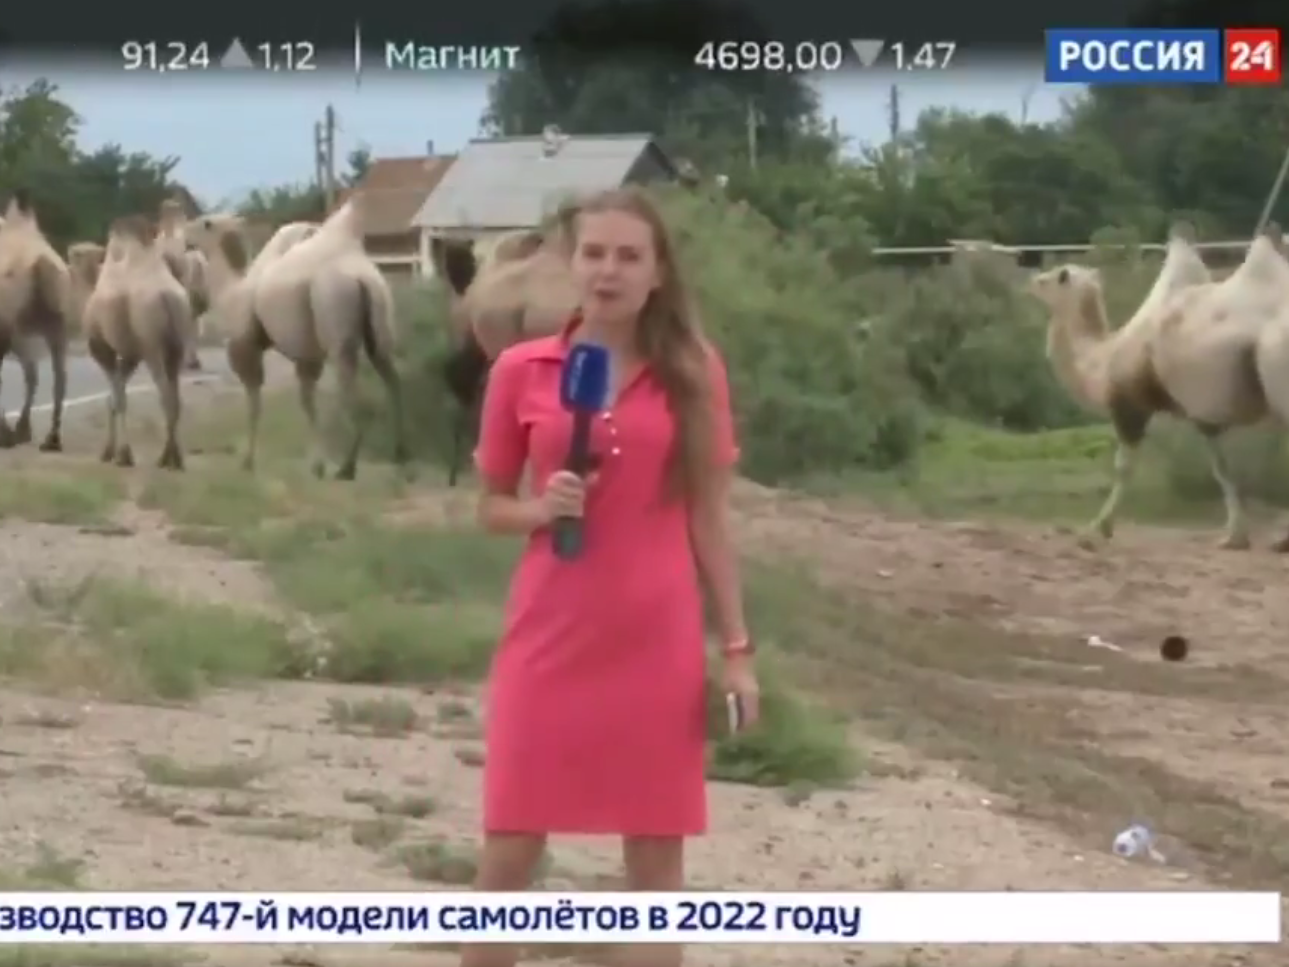 The camel invasion featured on the national news bulletin of state-owned TV.